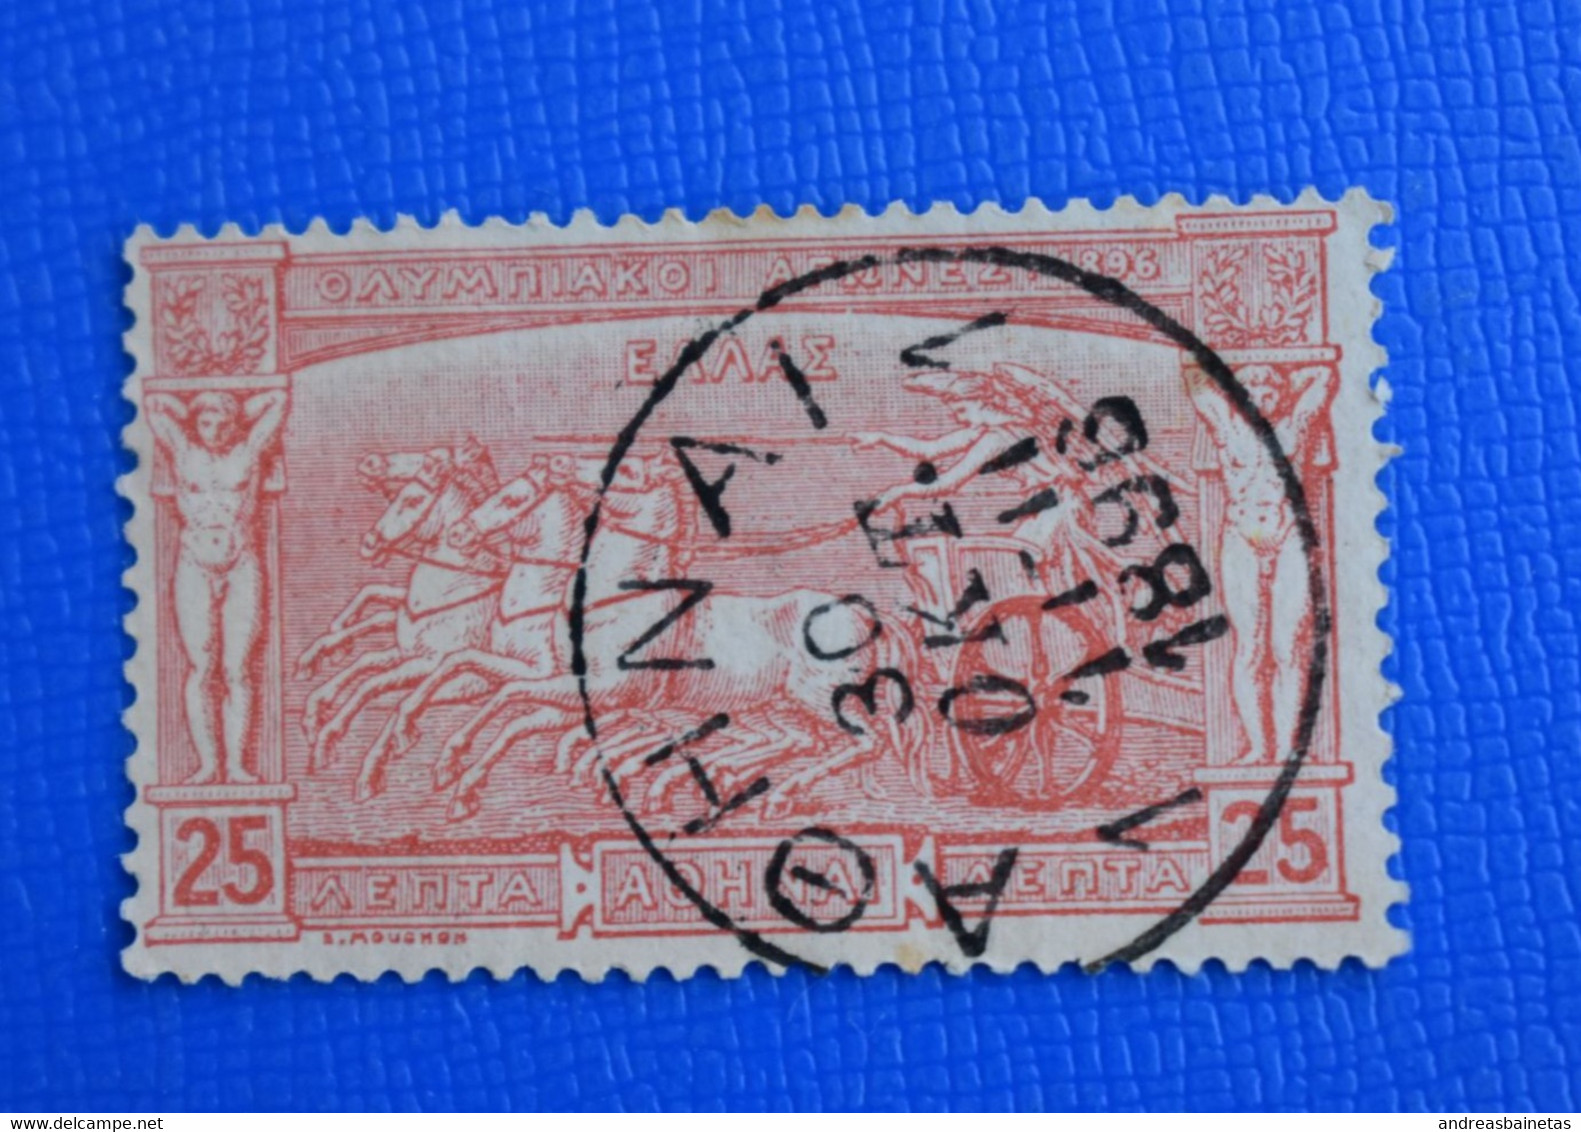 Stamps GREECE 1896 The 1st Modern Olympic Games 	25L 30/10/1896 ΑΘΗΝΑΙ Used - Gebraucht